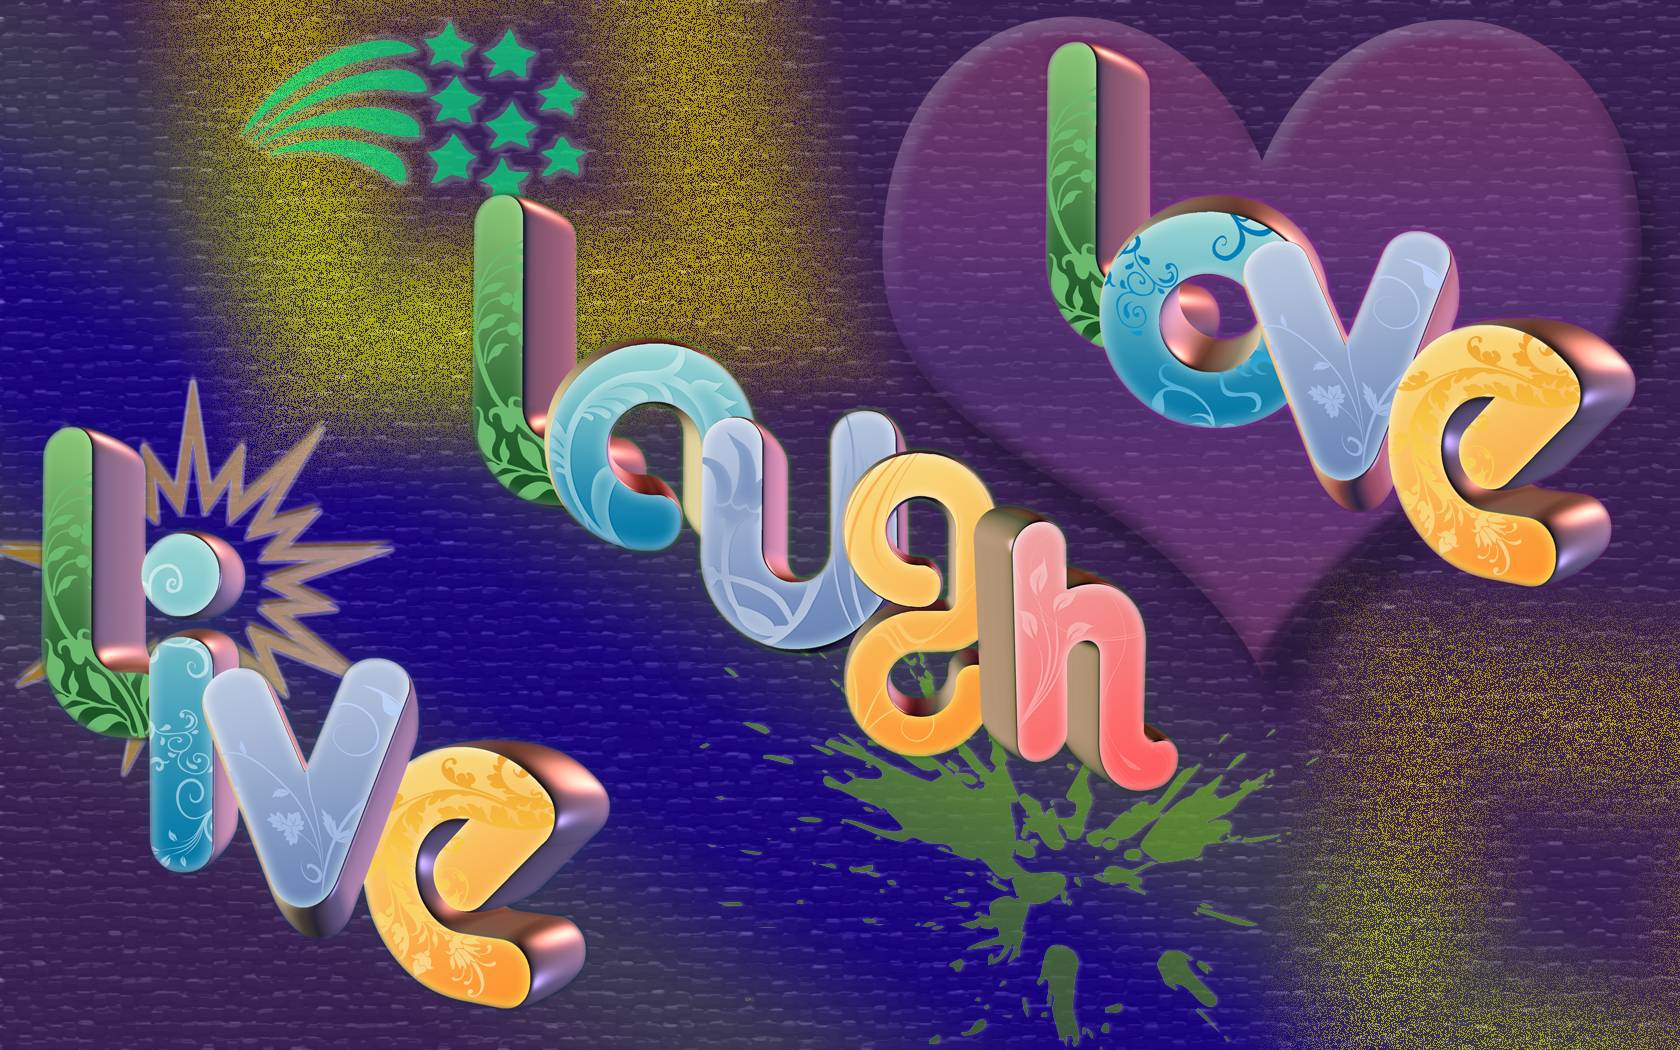 Live, Laugh, Love wallpaper. Decorate your Holidays